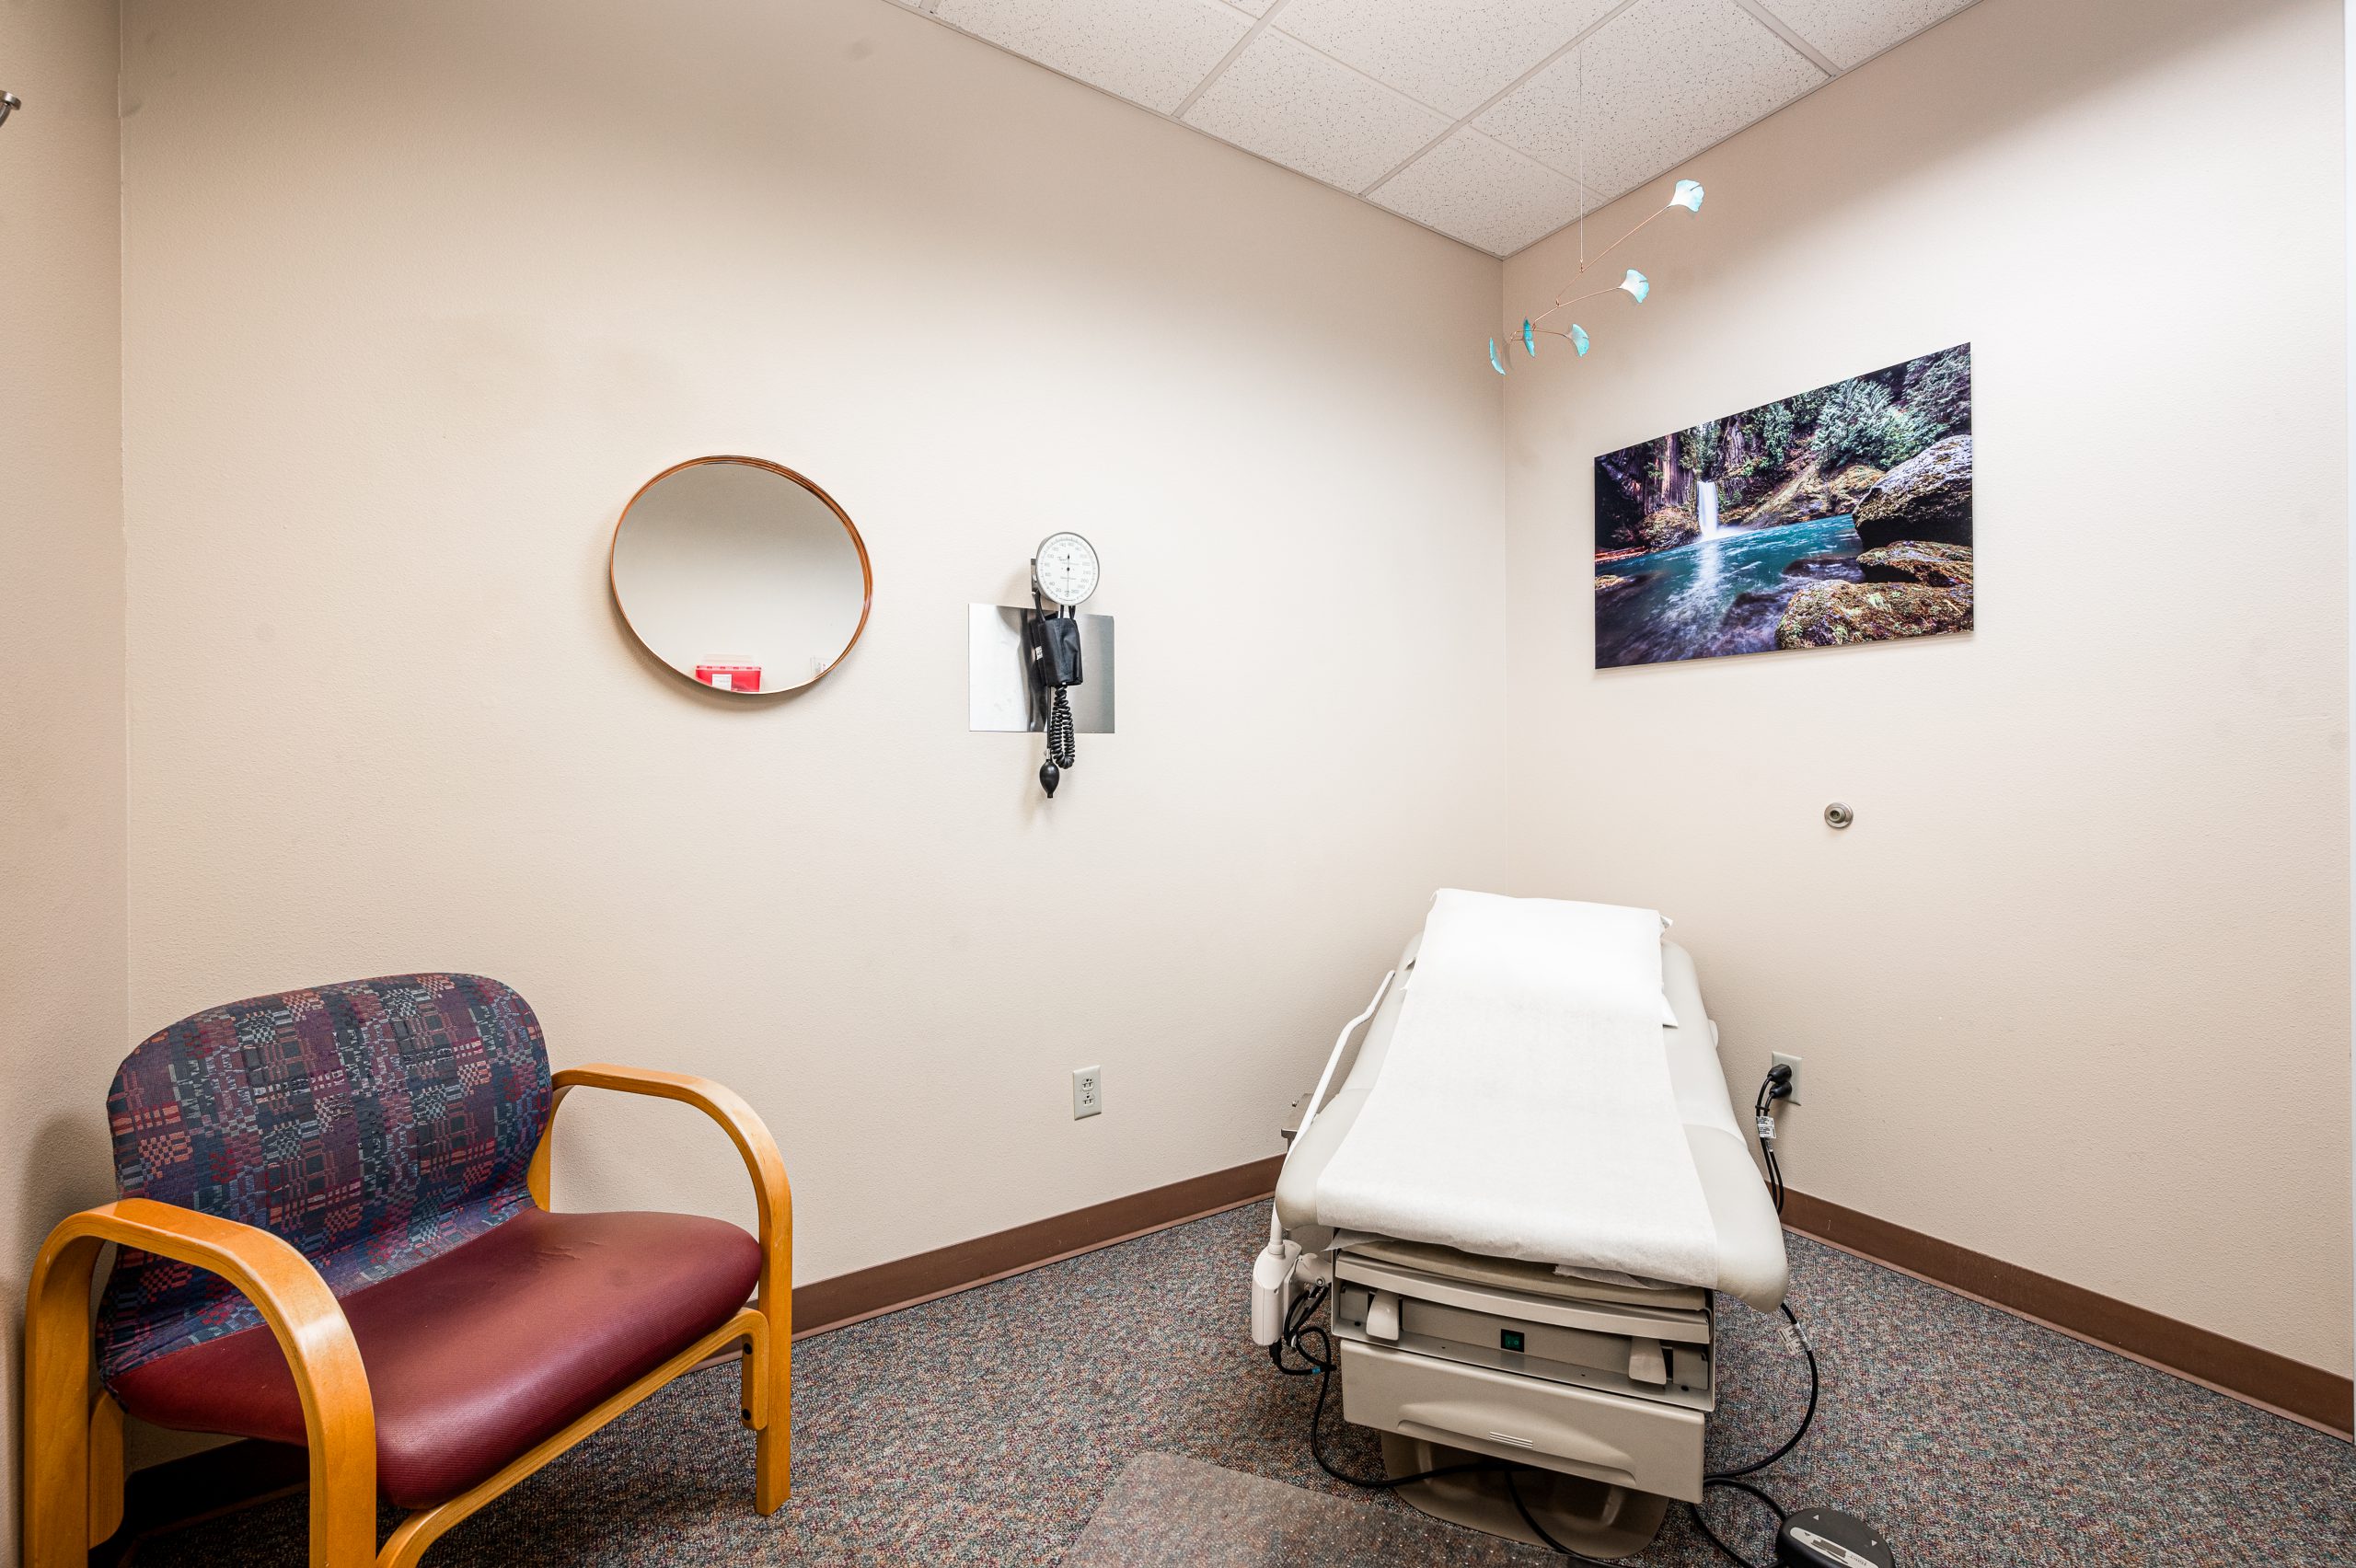 Clinic room with hospital bed and waiting chair.  Photo of nature and a mirror are located on the wall